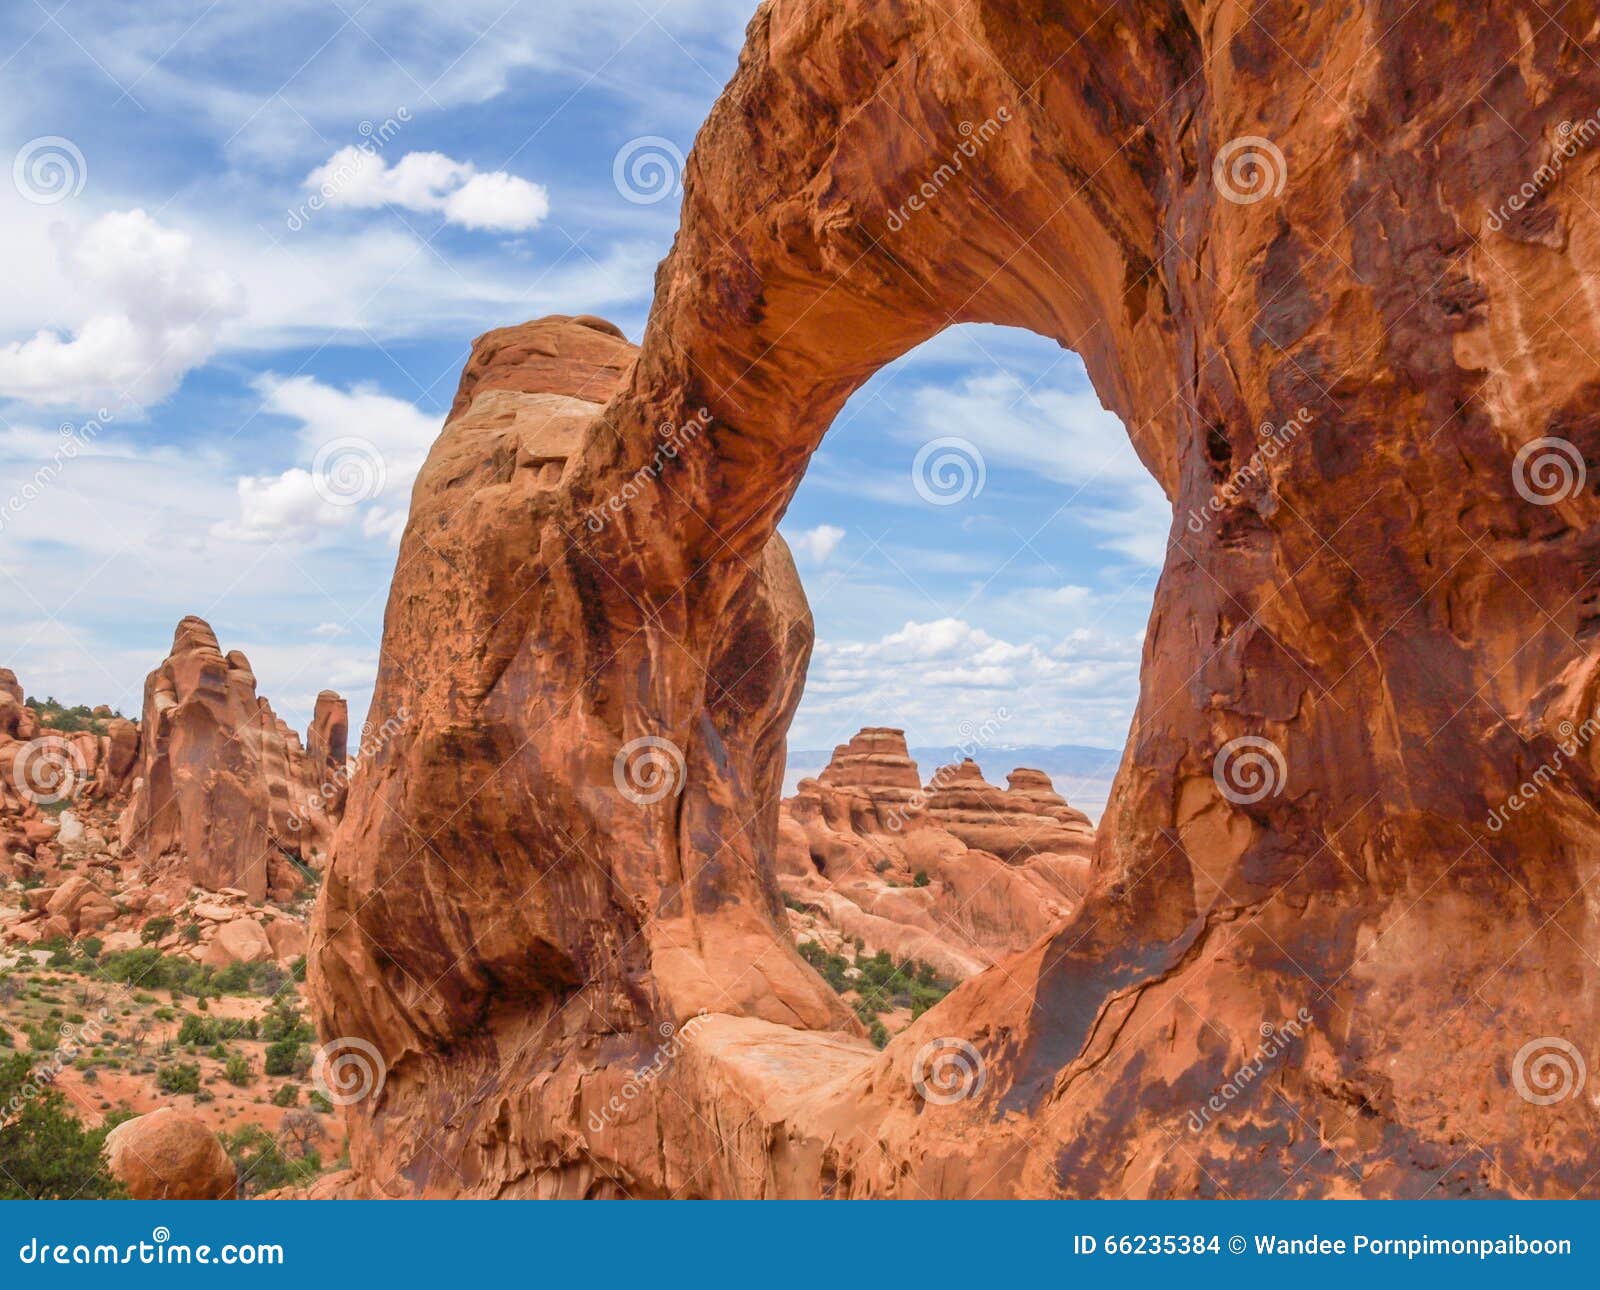 double o arch, arches national park, utah, usa